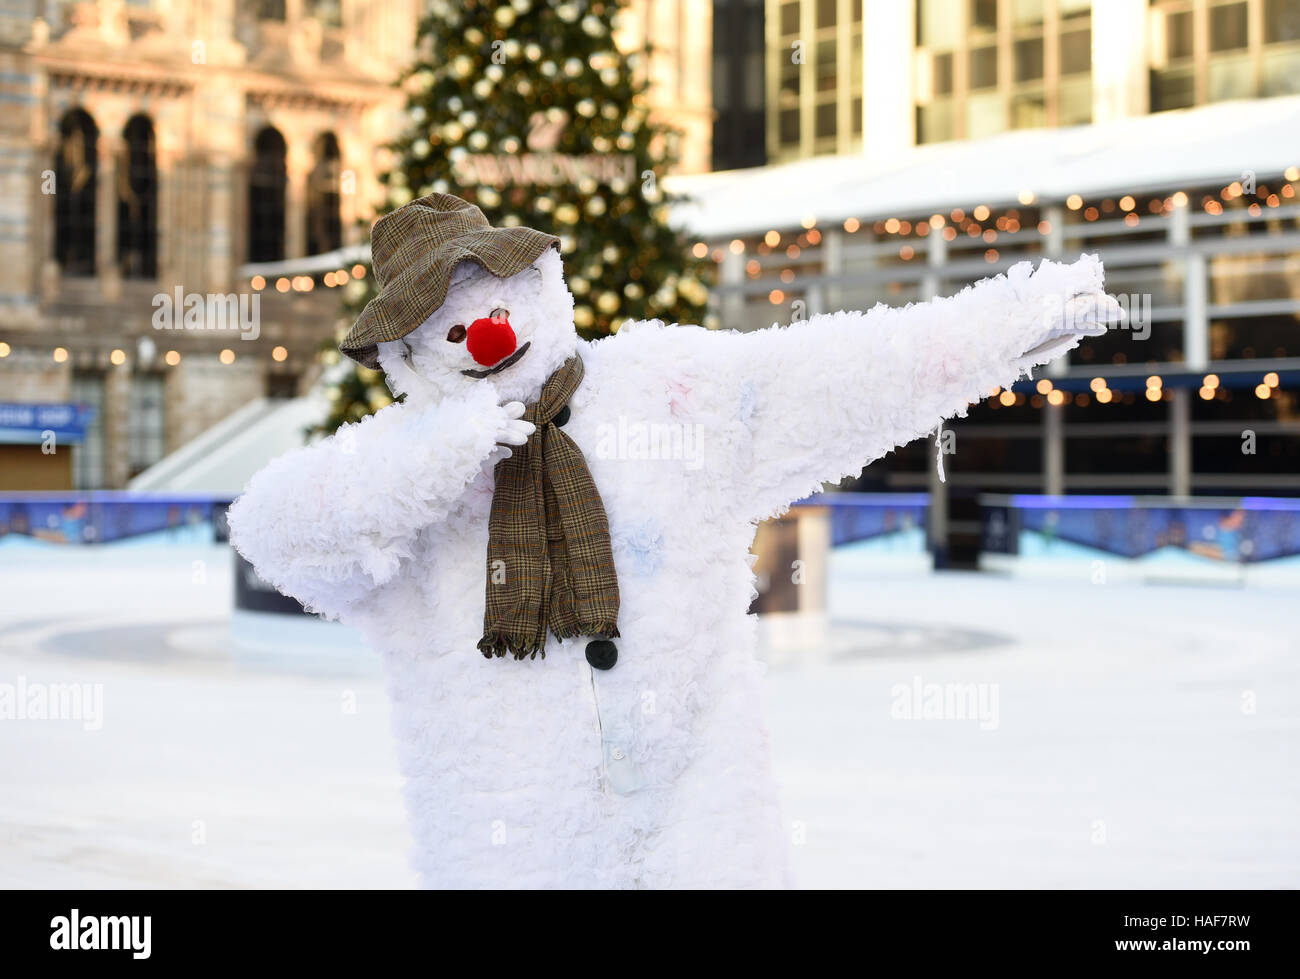 An actor plays The Snowman during a photo call at the Natural History Museum Ice Rink for the theatre production of The Snowman, running at the Peacock Theatre in London. Stock Photo